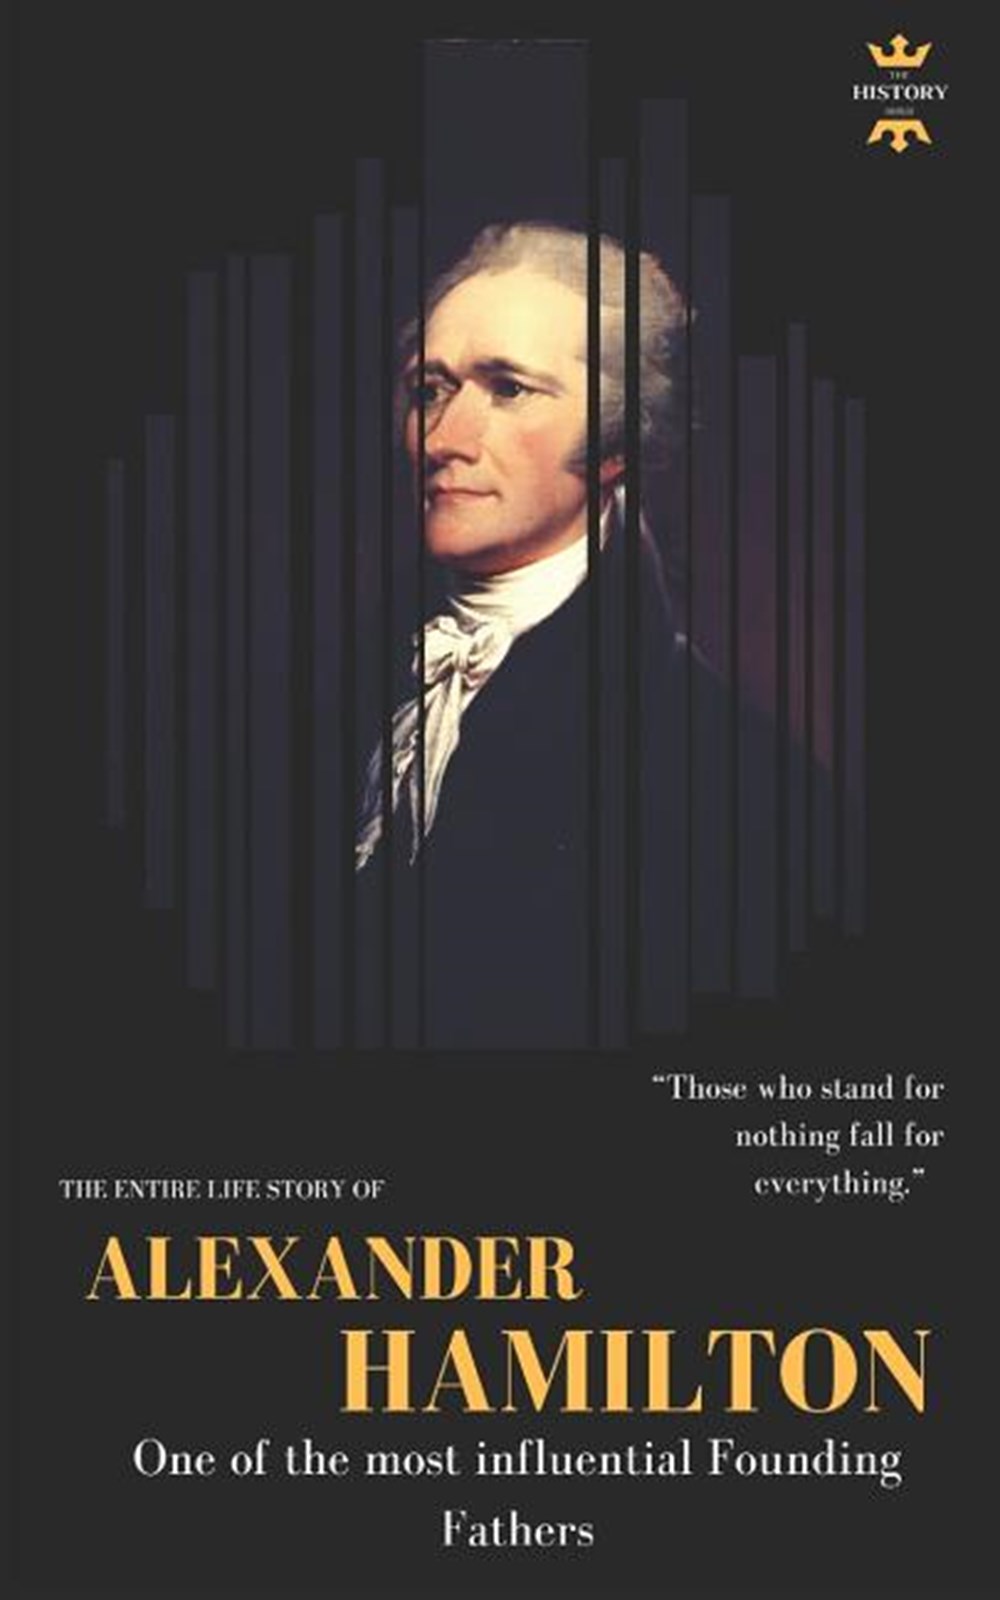 Alexander Hamilton One of the most influential Founding Fathers. The Entire Life Story